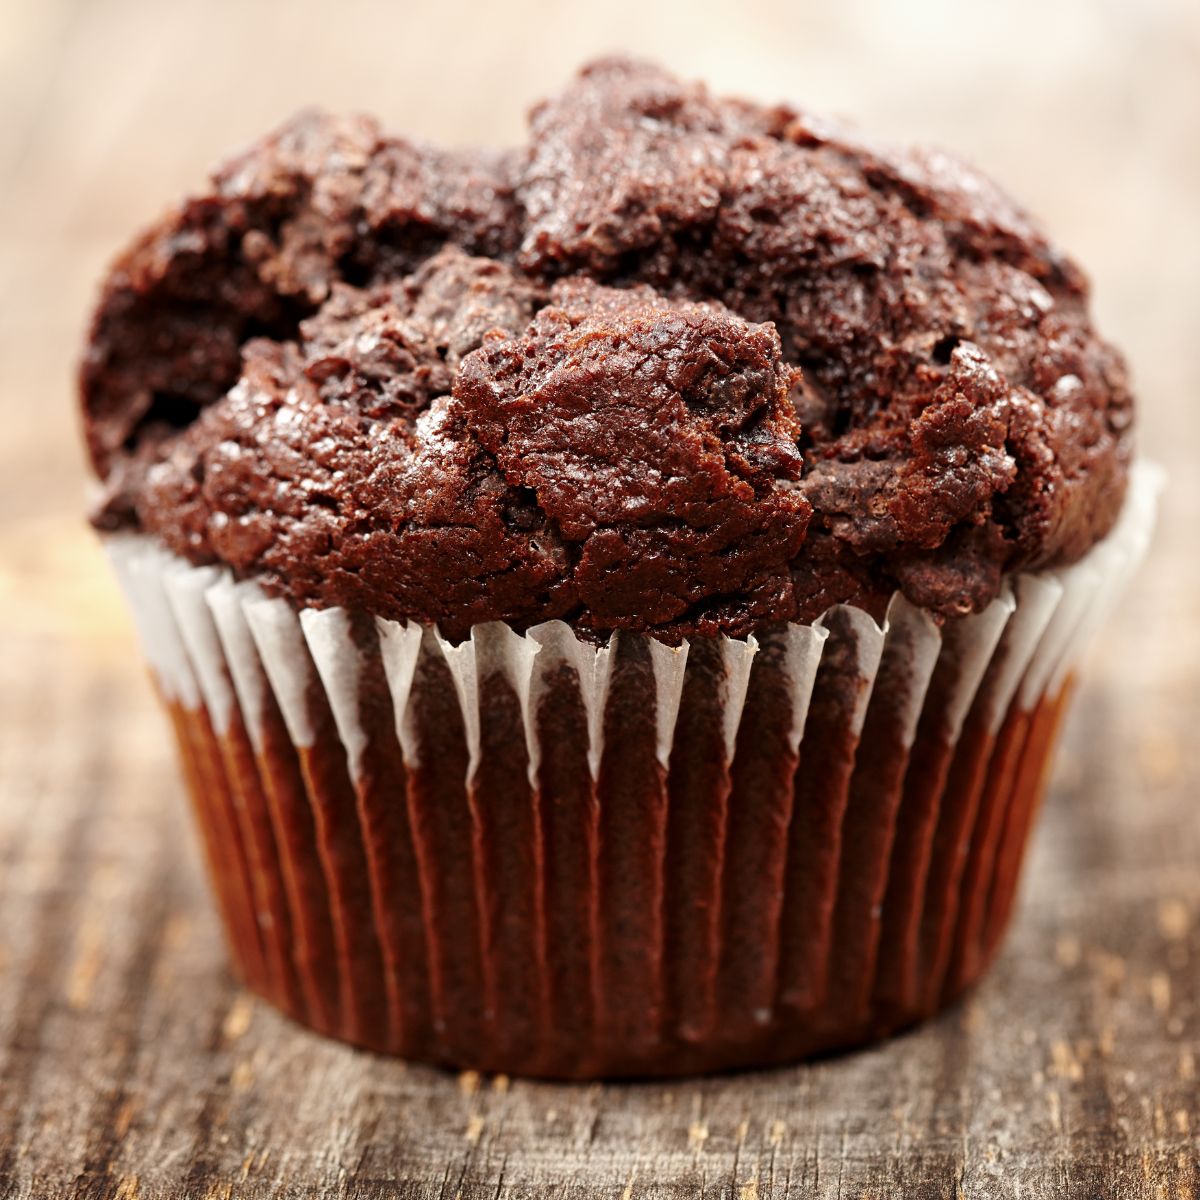 A chocolate muffin up really close on a wooden surface. 